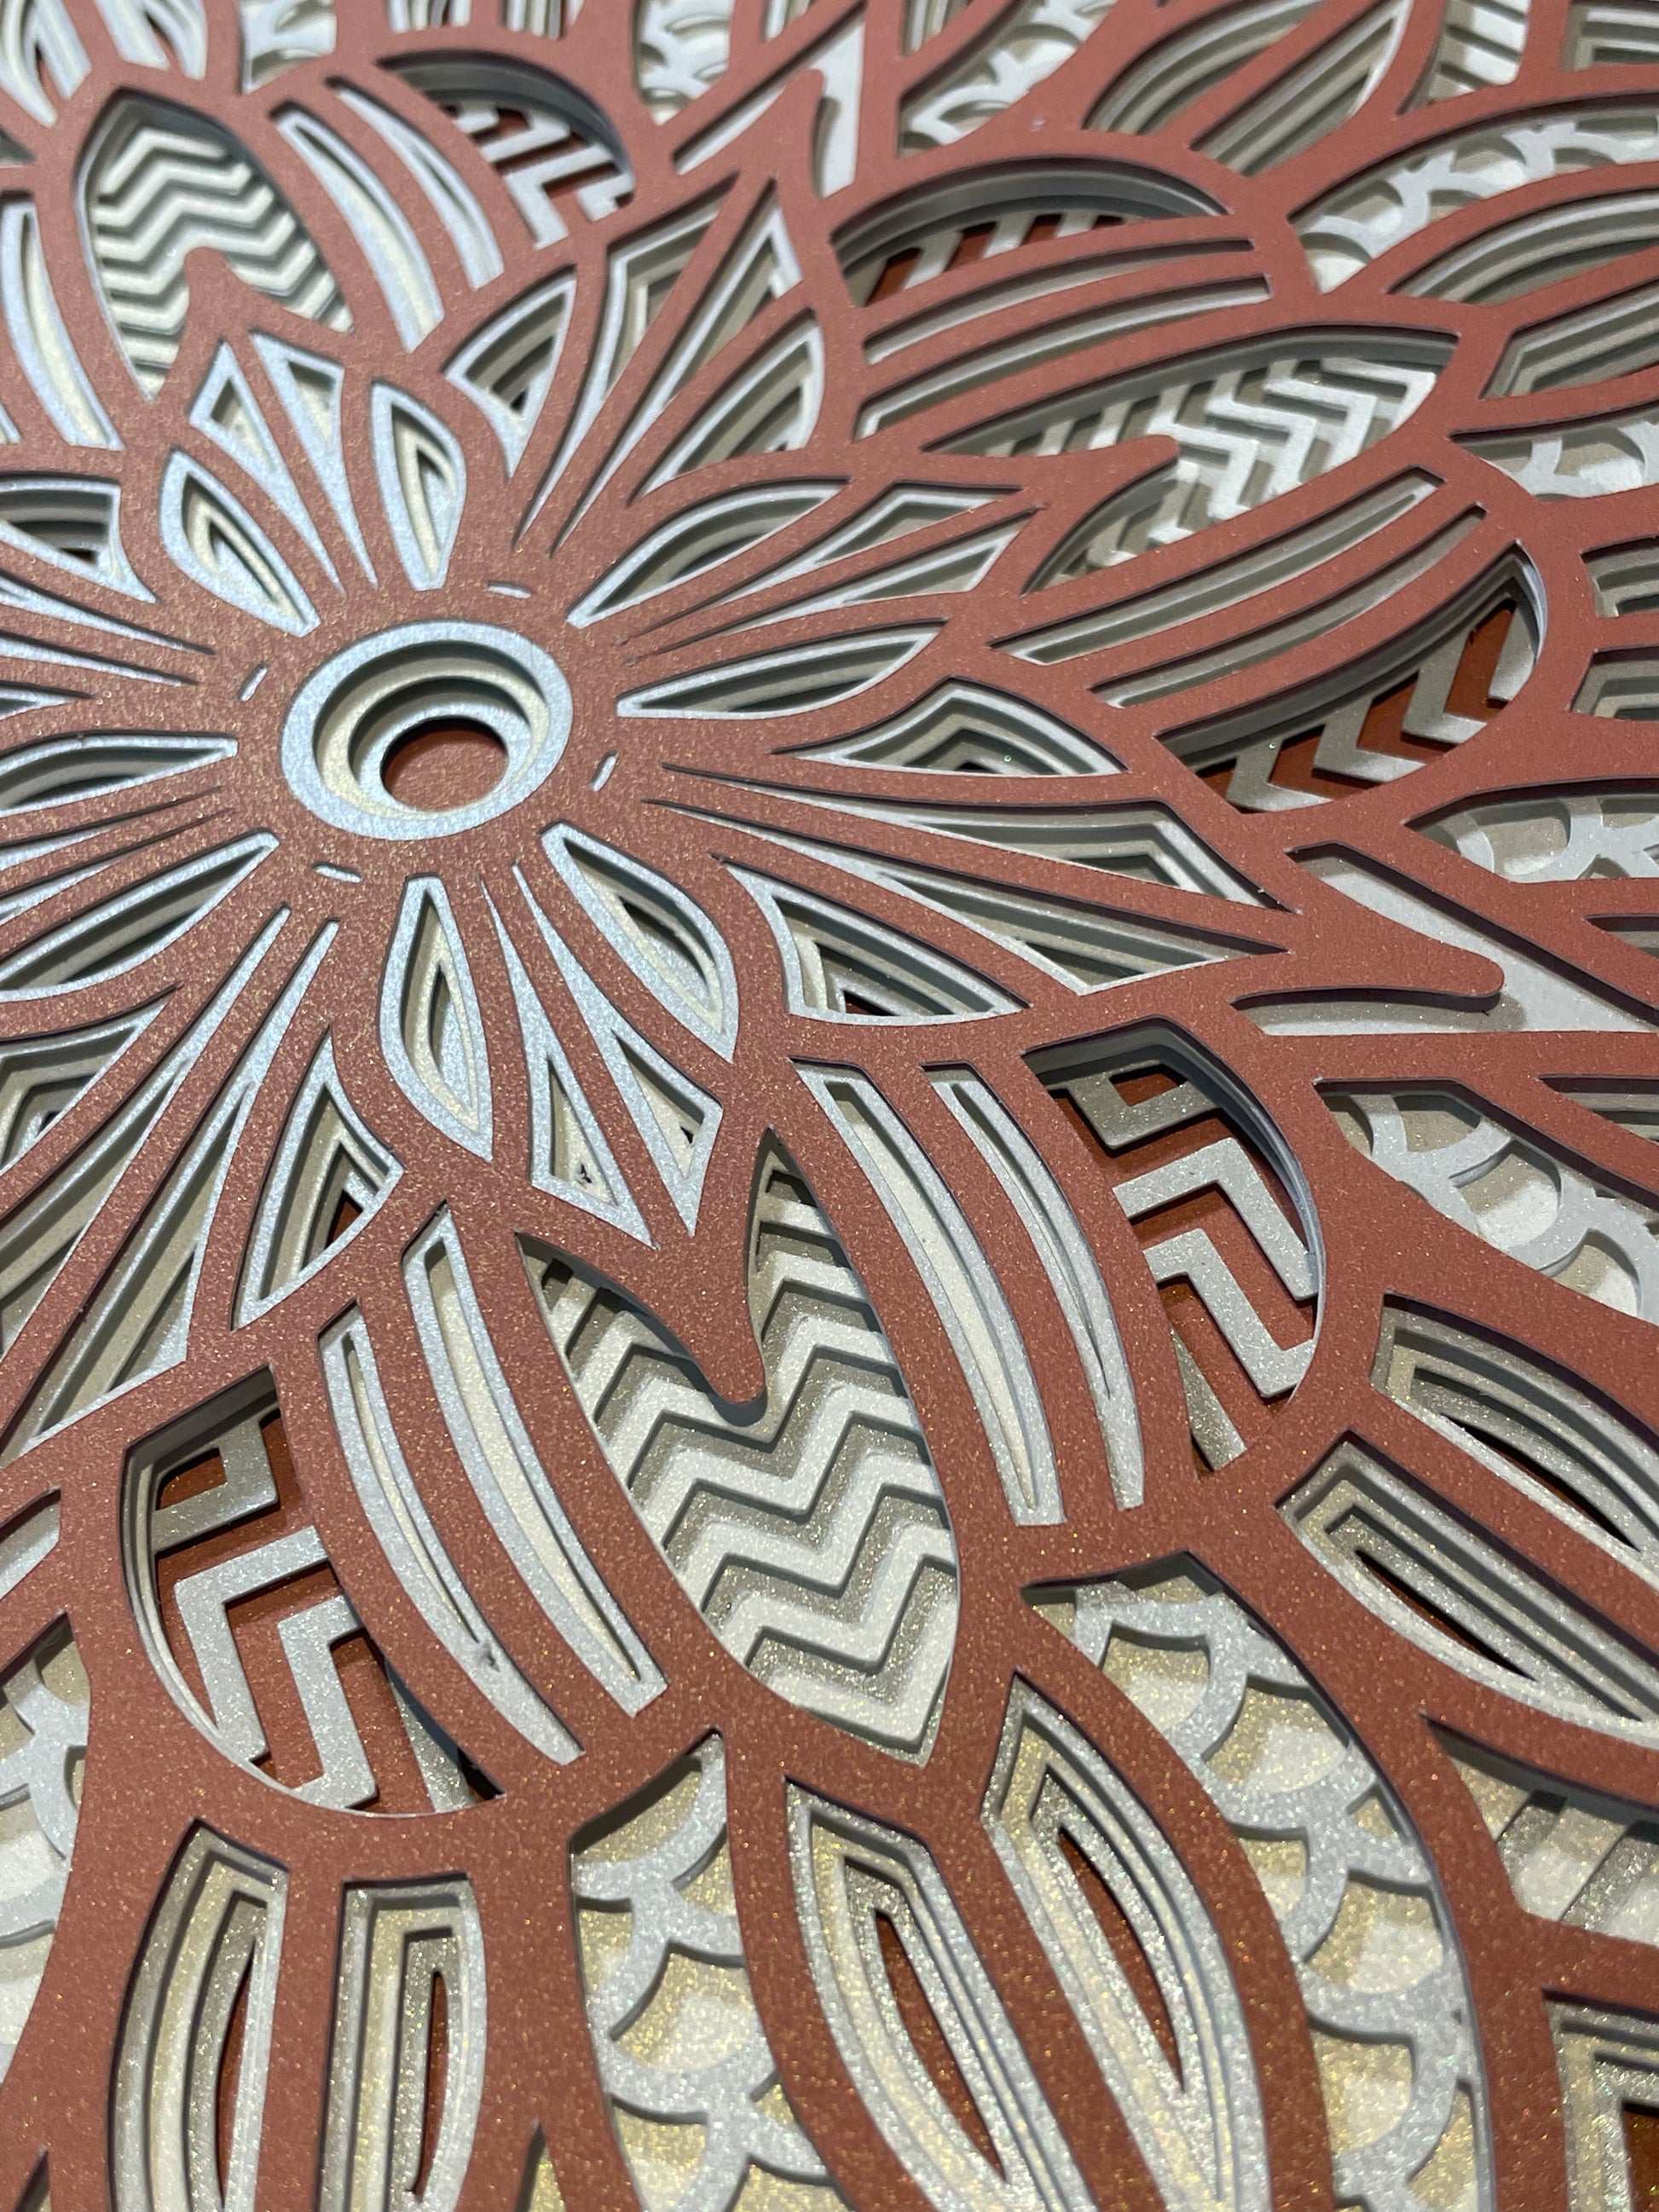 Close up view of 3d layered Mandala SVG Design by Home Stitchery Decor.  Find all your favorite intricate 3d layered Mandala designs on our website.  Follow along with our complete Cricut Mandala 3d designs. 